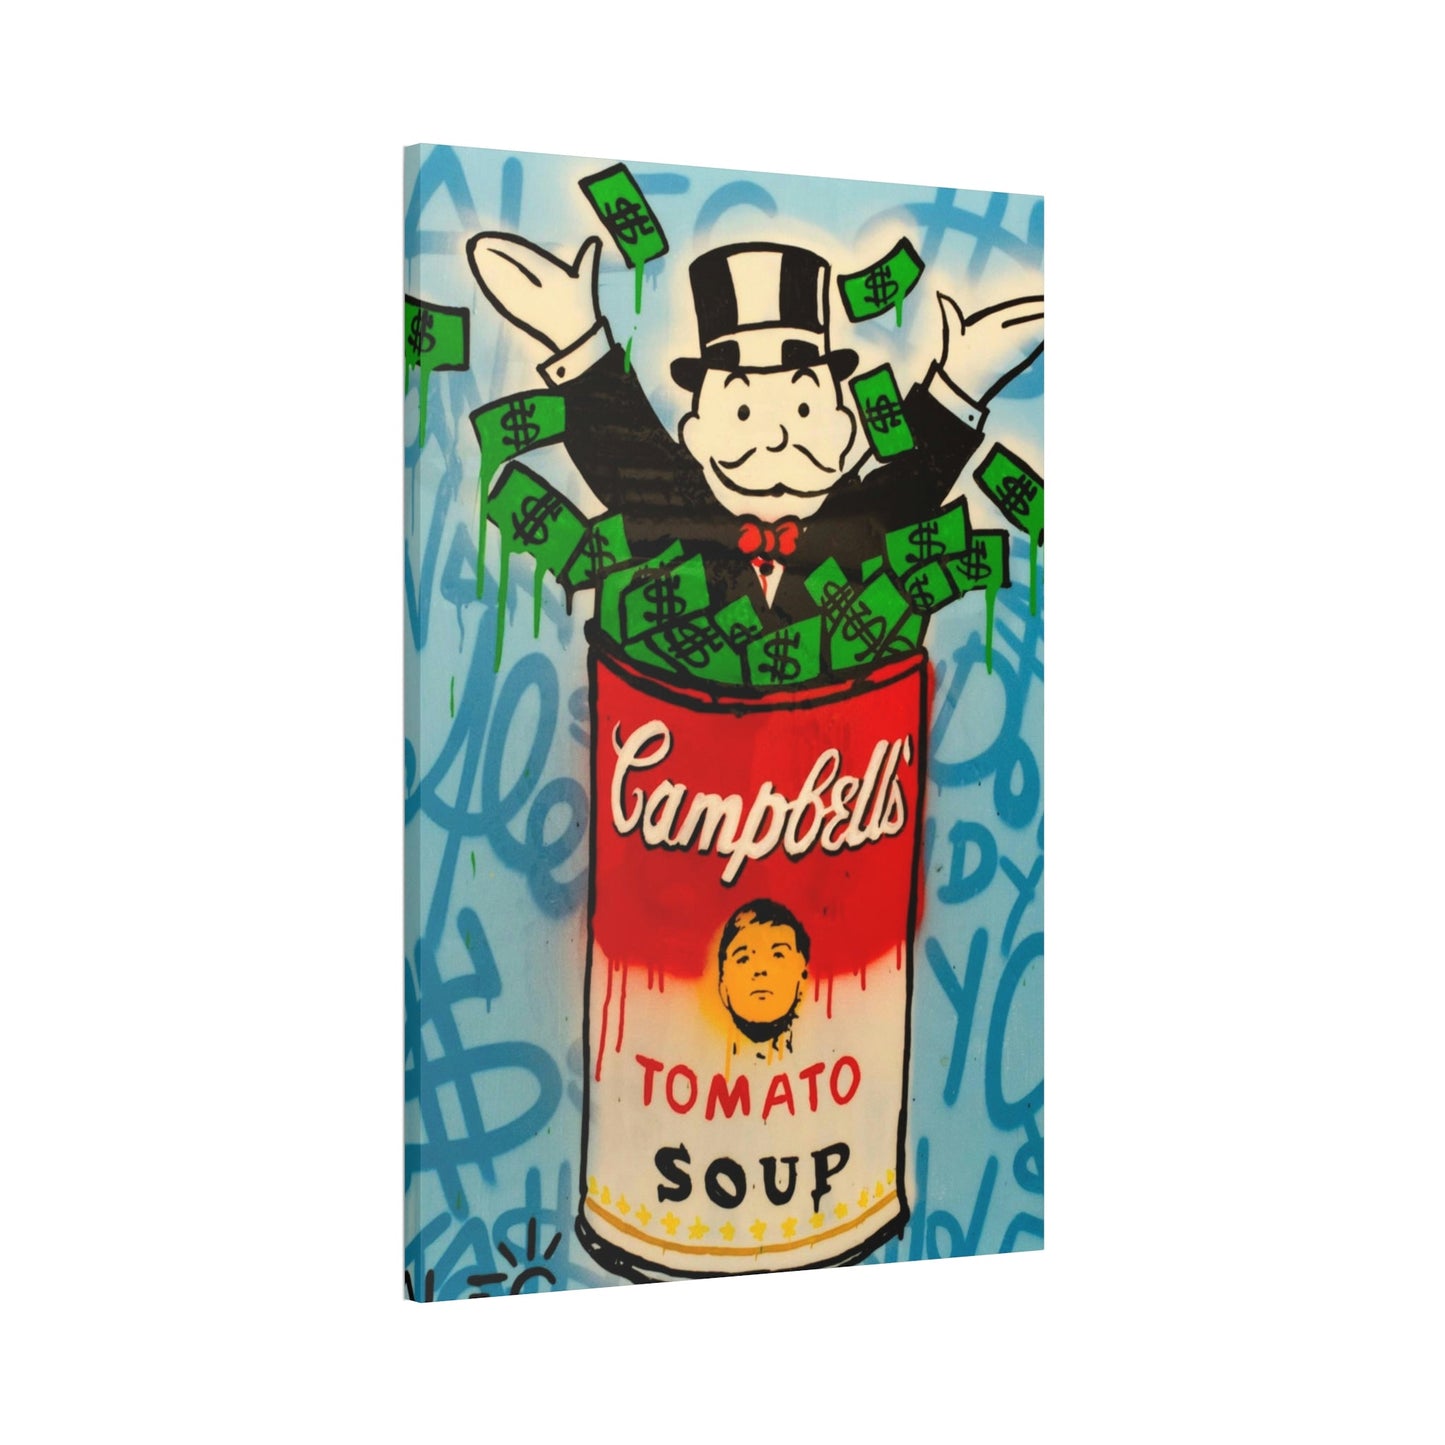 Money Talks in Alec Monopoly's Canvas Painting: Wall Art and Poster for Finance Enthusiasts